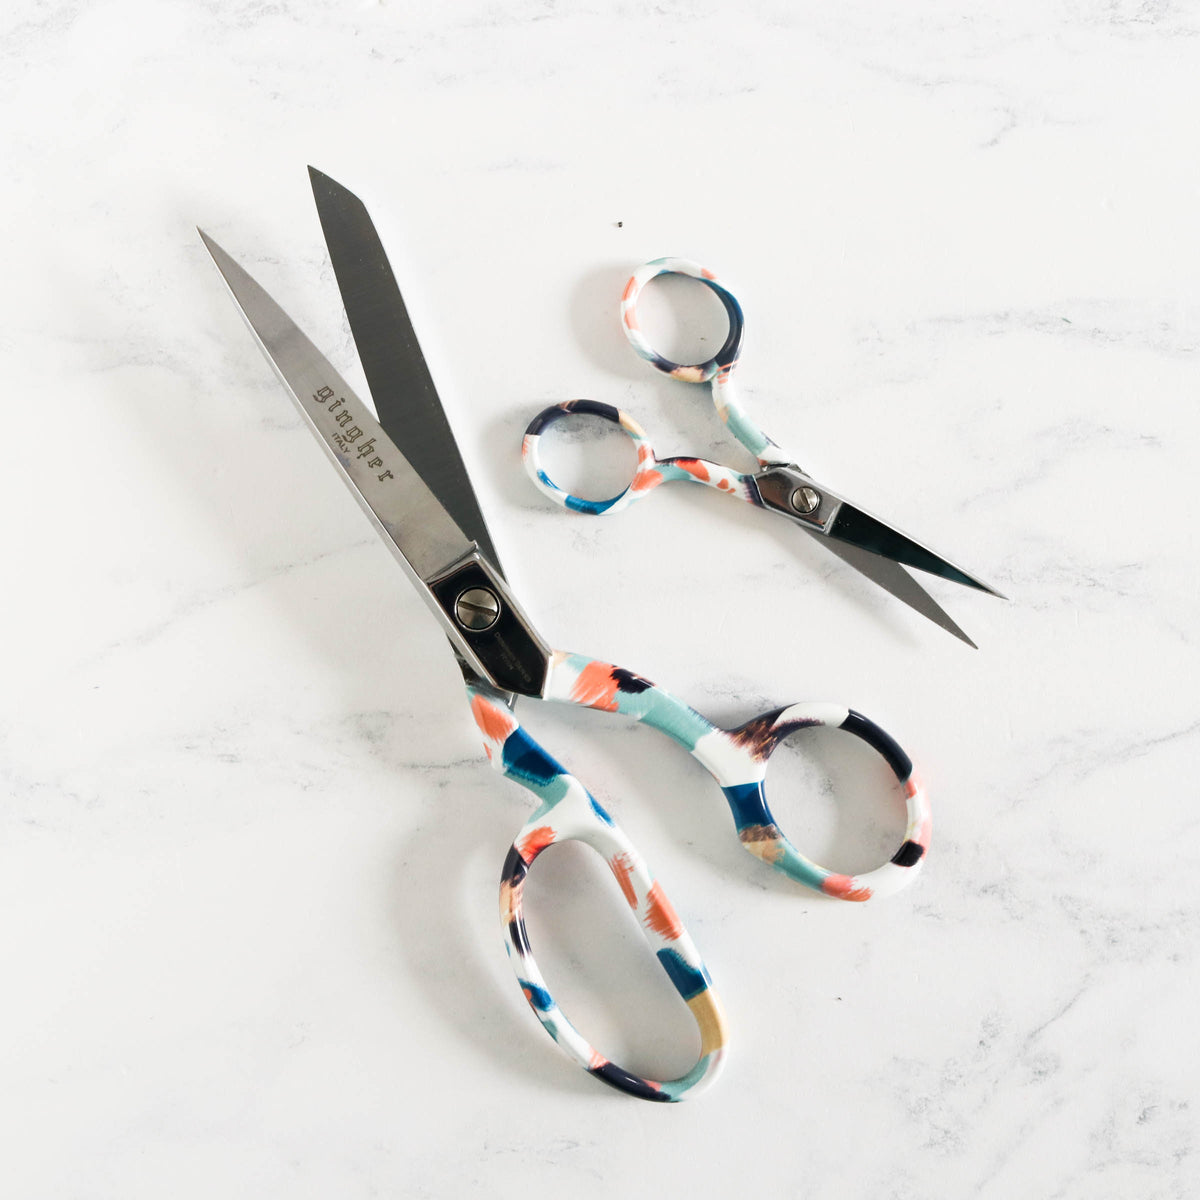 Gingher Designer Series Shears and Embroidery Scissors - Rynn